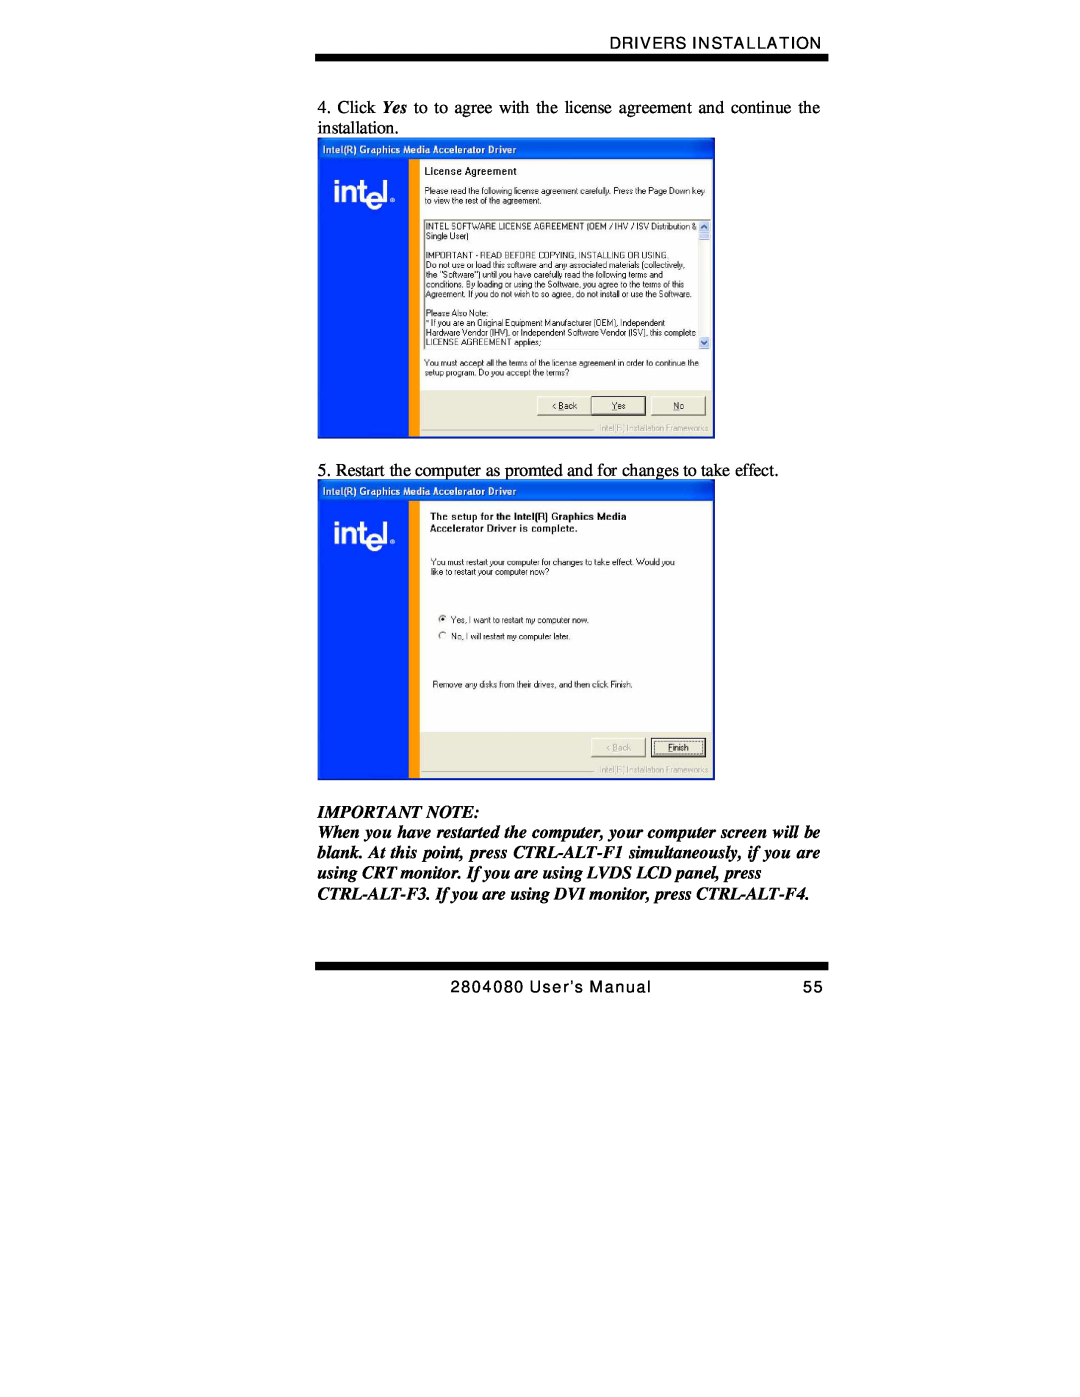 Intel 2804080, Duo/Solo 945GM user manual Important Note 